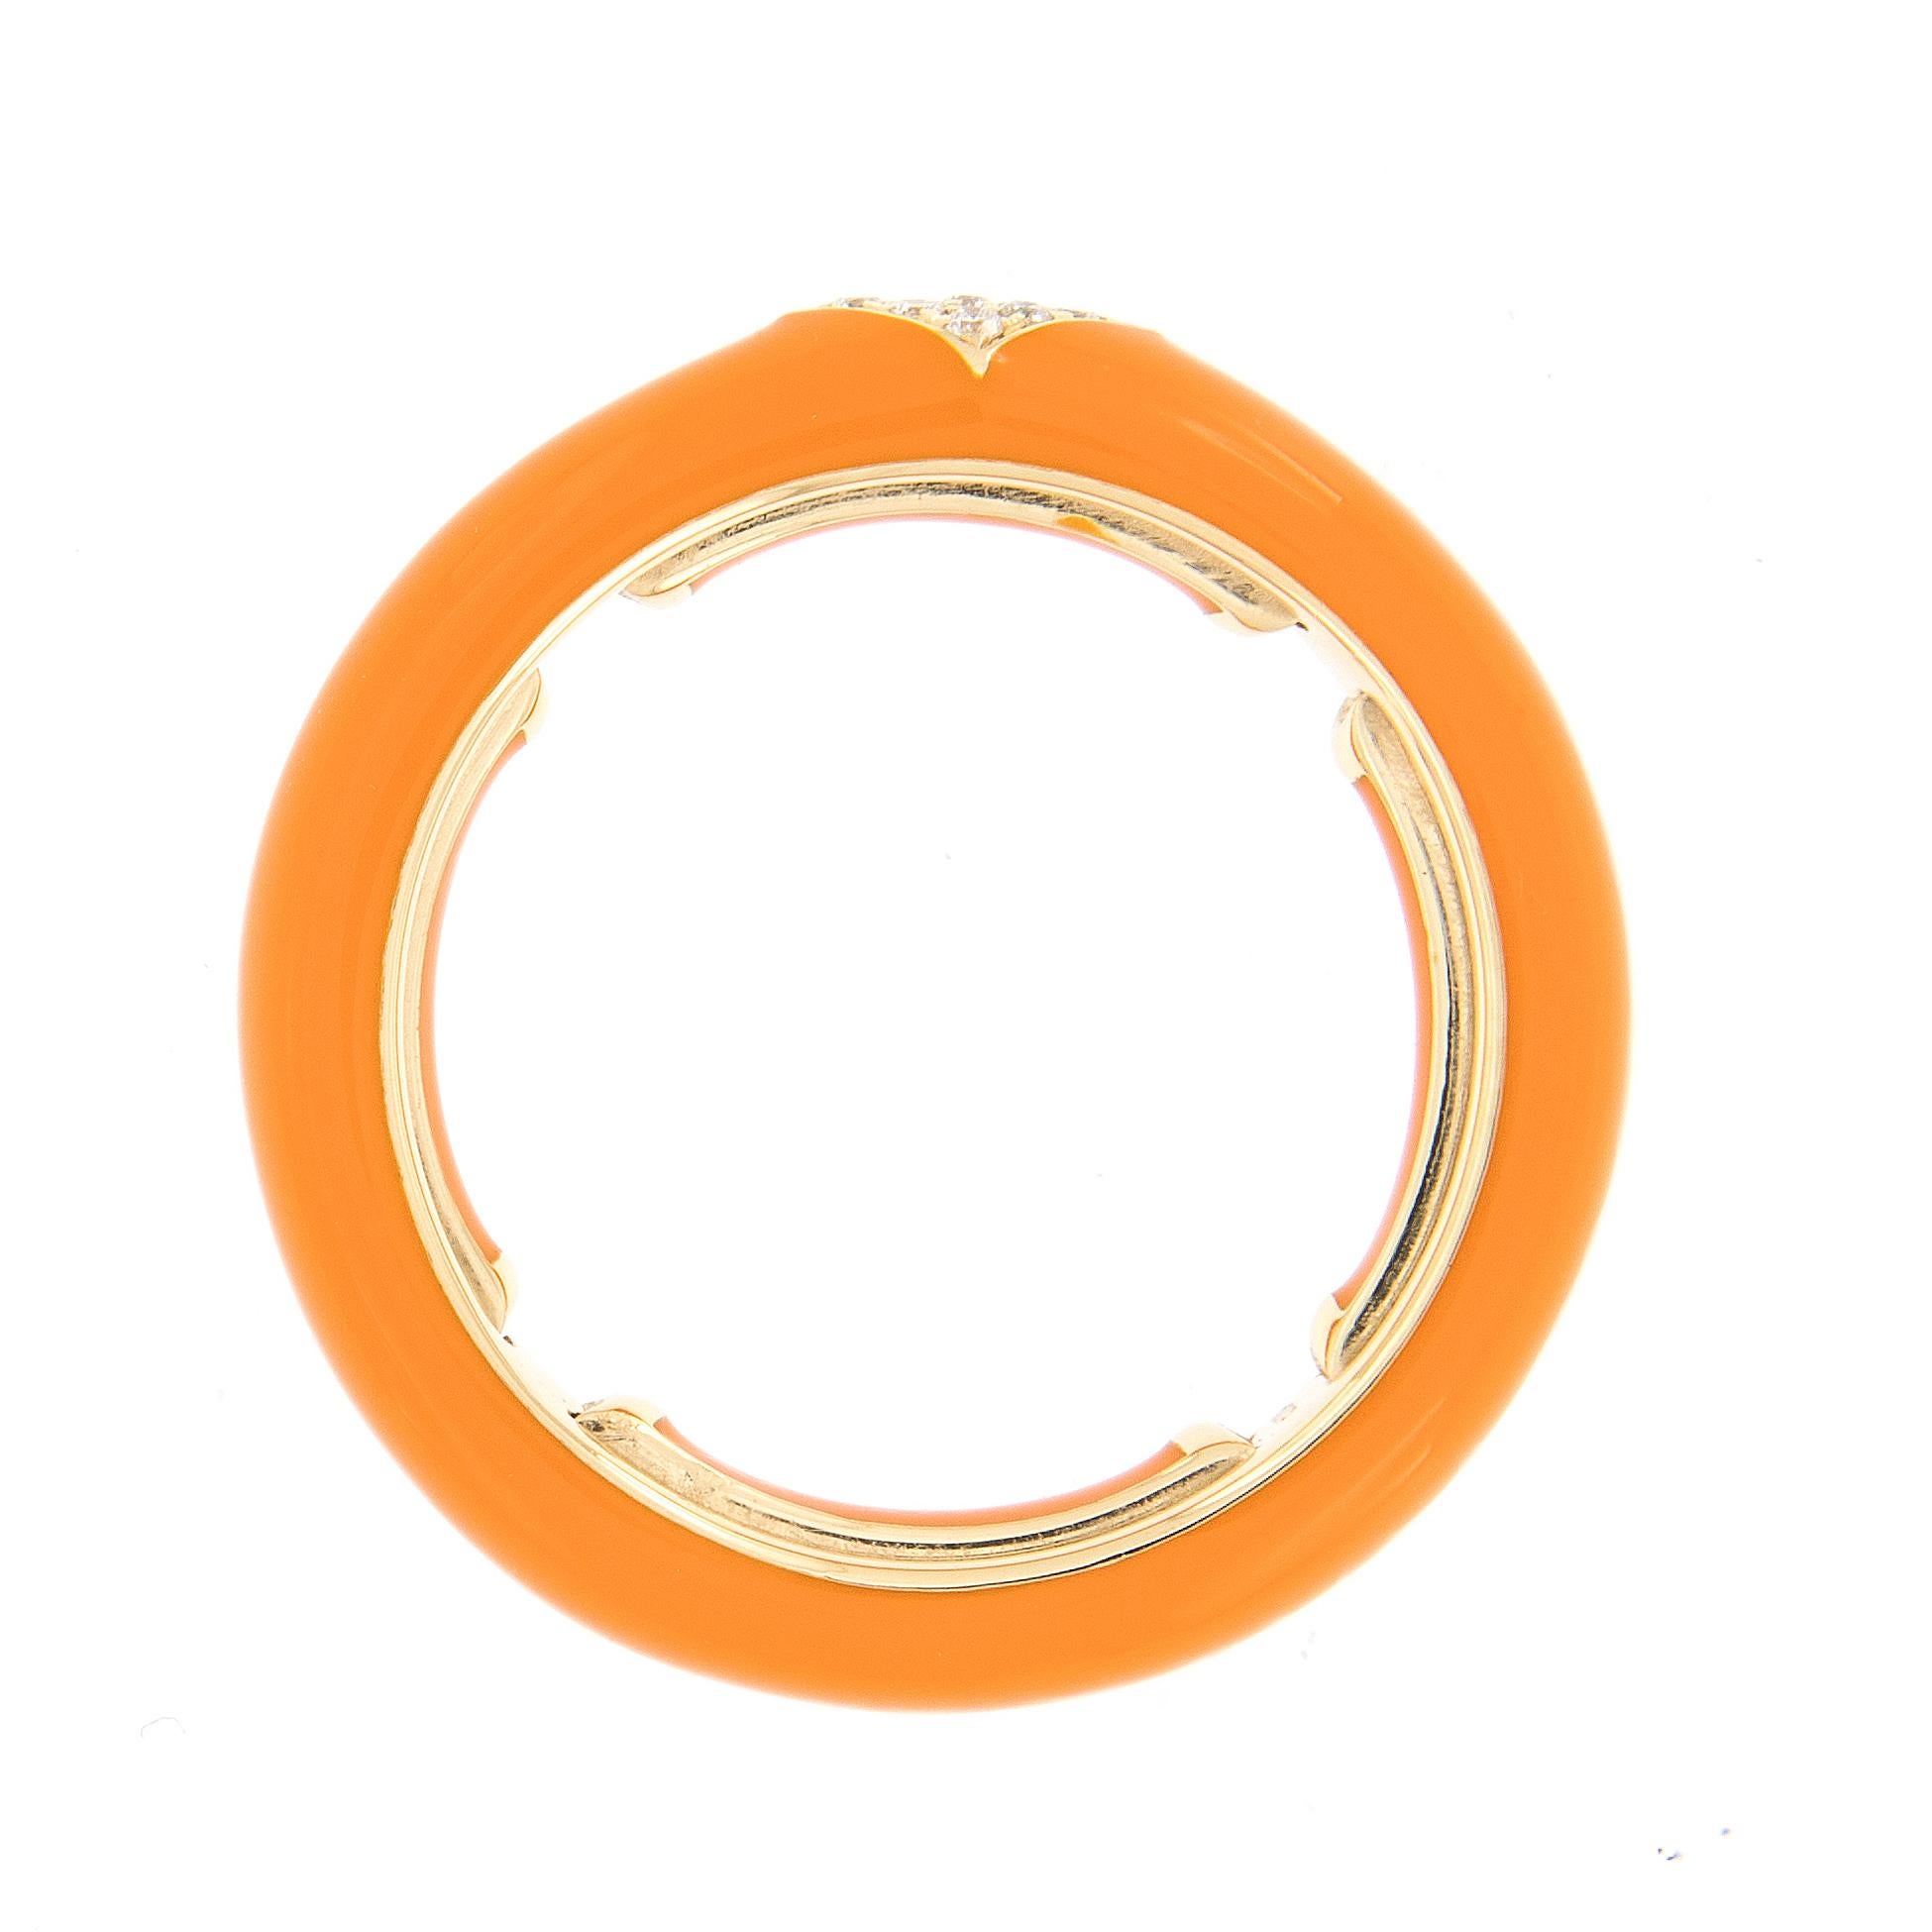 Bold, bright and beautiful! This contemporary enamel ring is hand-crafted in Italy for Campanelli & Pear. Ring is 18k yellow gold featuring a smooth enamel finish in pop color orange and accented with nine pave set diamonds. The ring features a